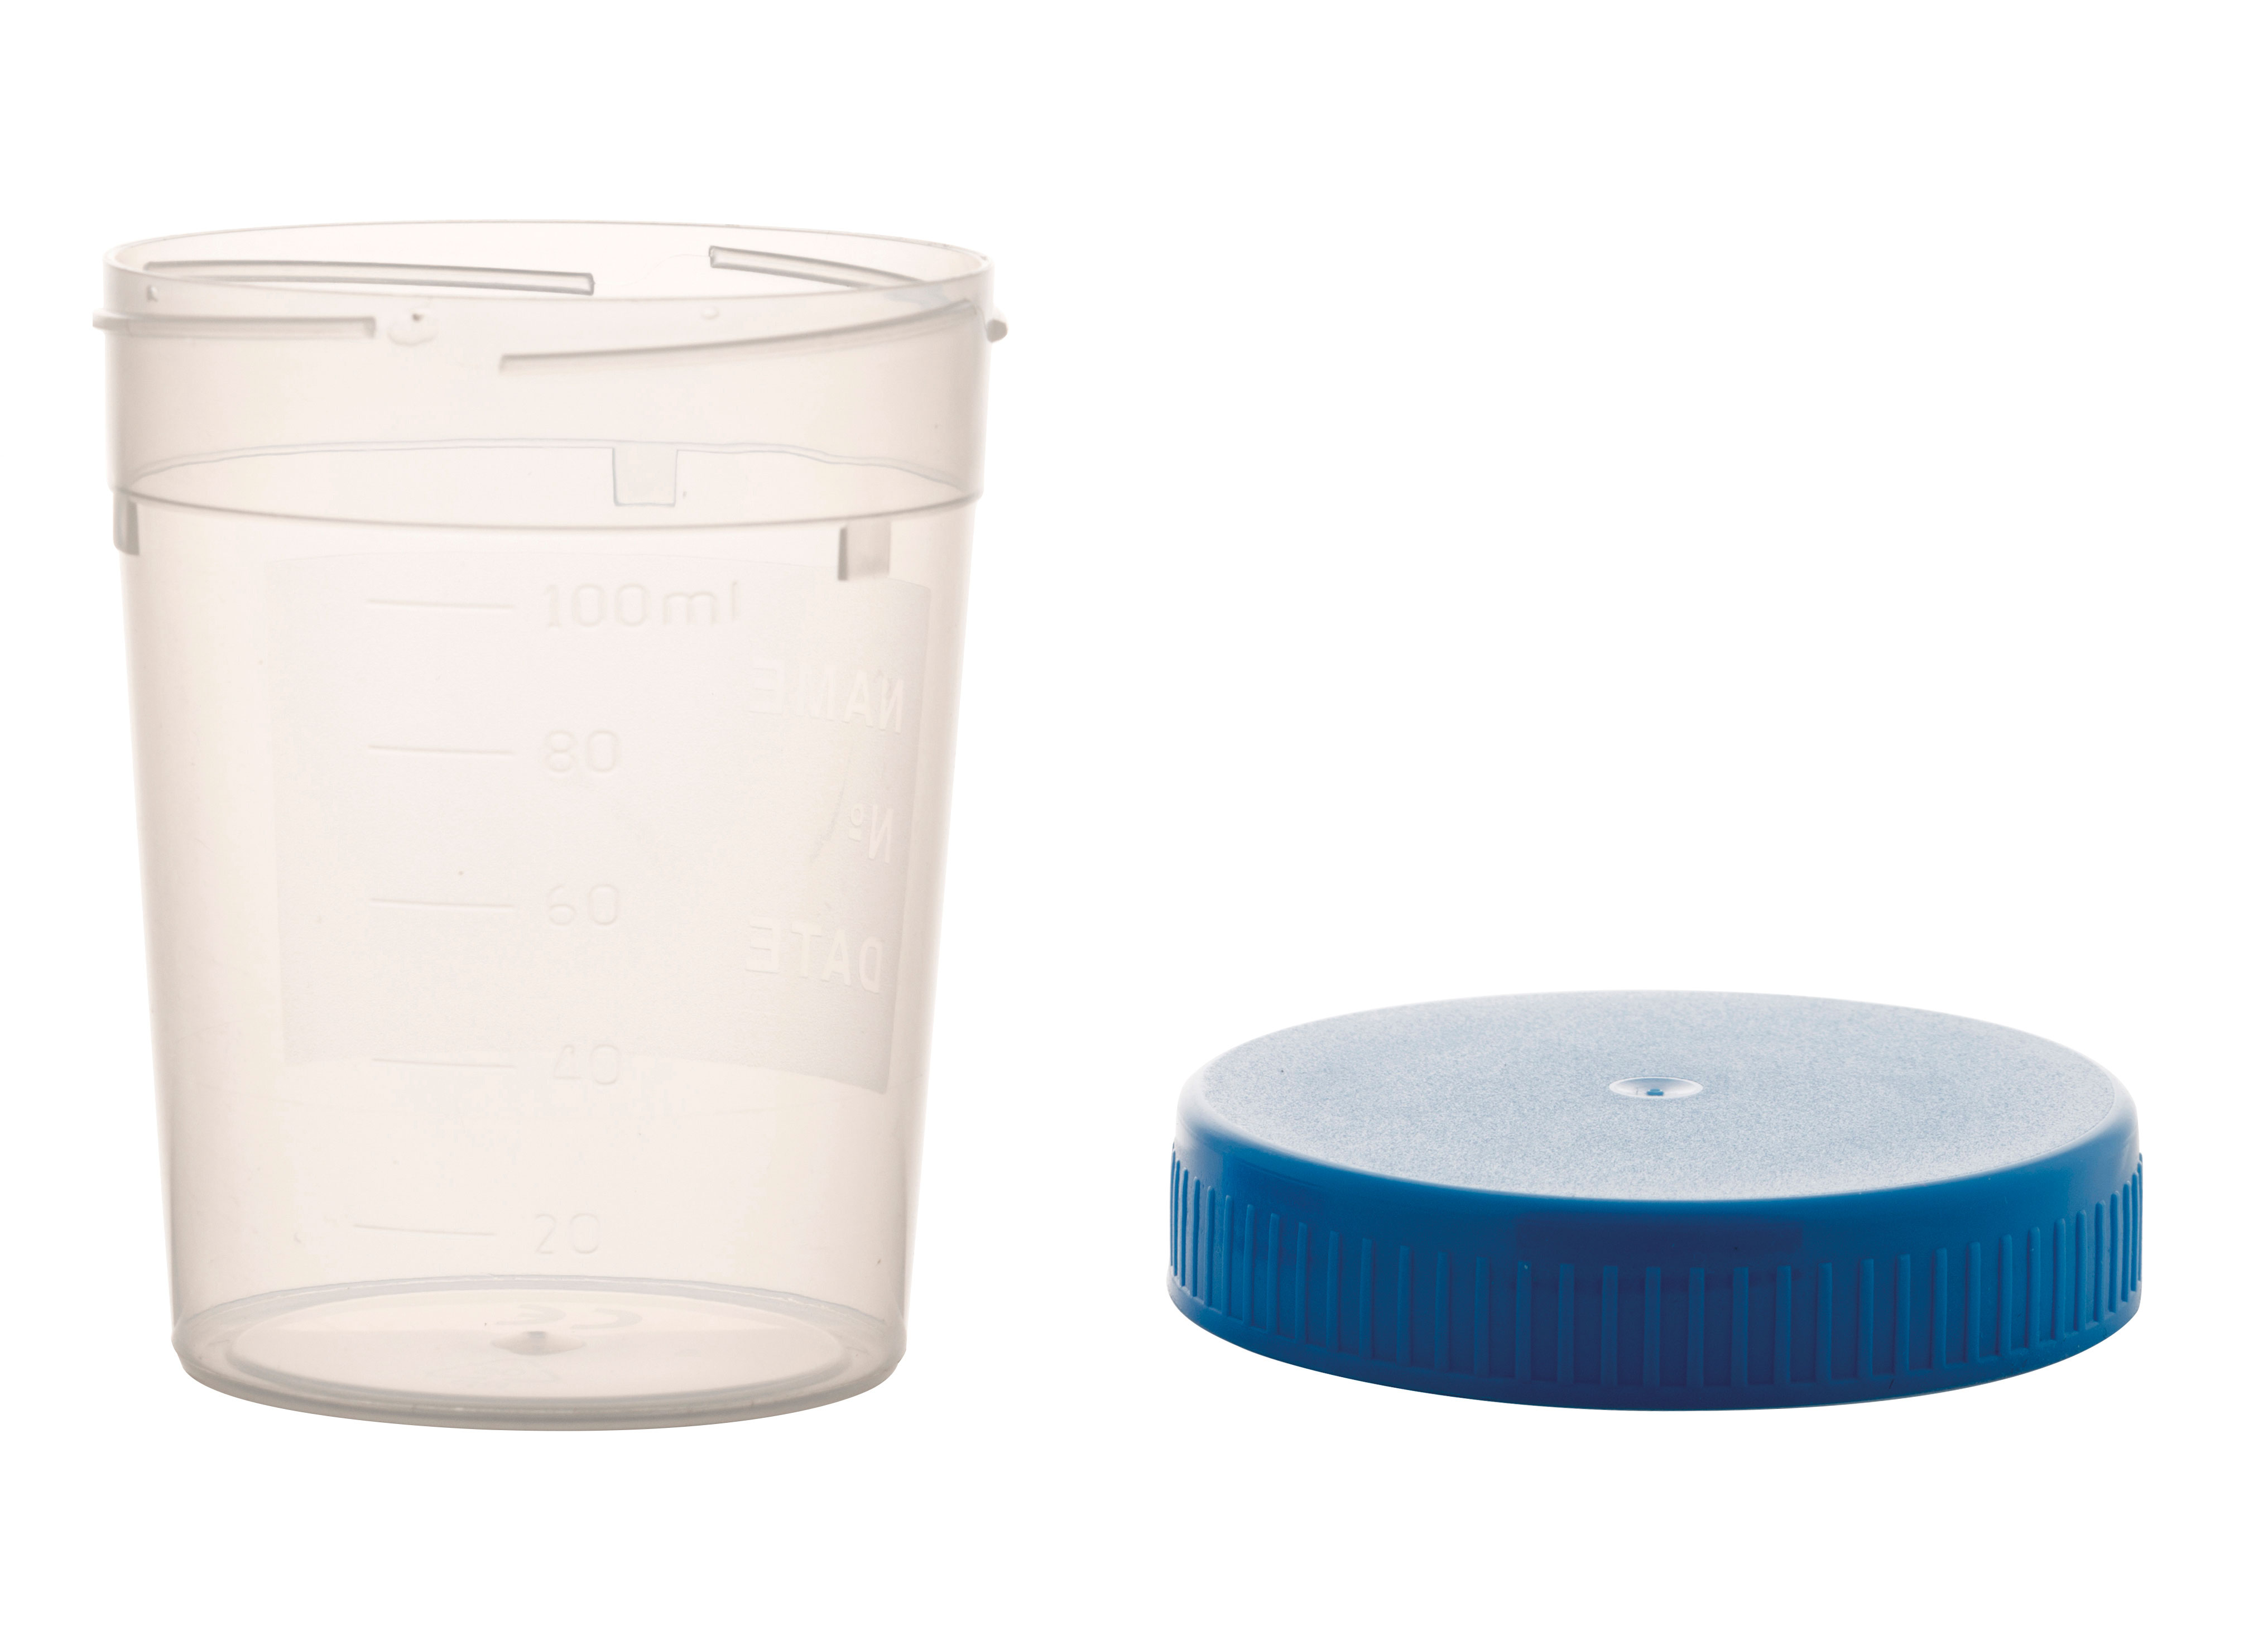 Urine container graduated. Vol: 150 ml. Cap not assembled. Cap color: Blue. Material: PP. Writting surface: Yes. Dim: 58 x 72 mm.